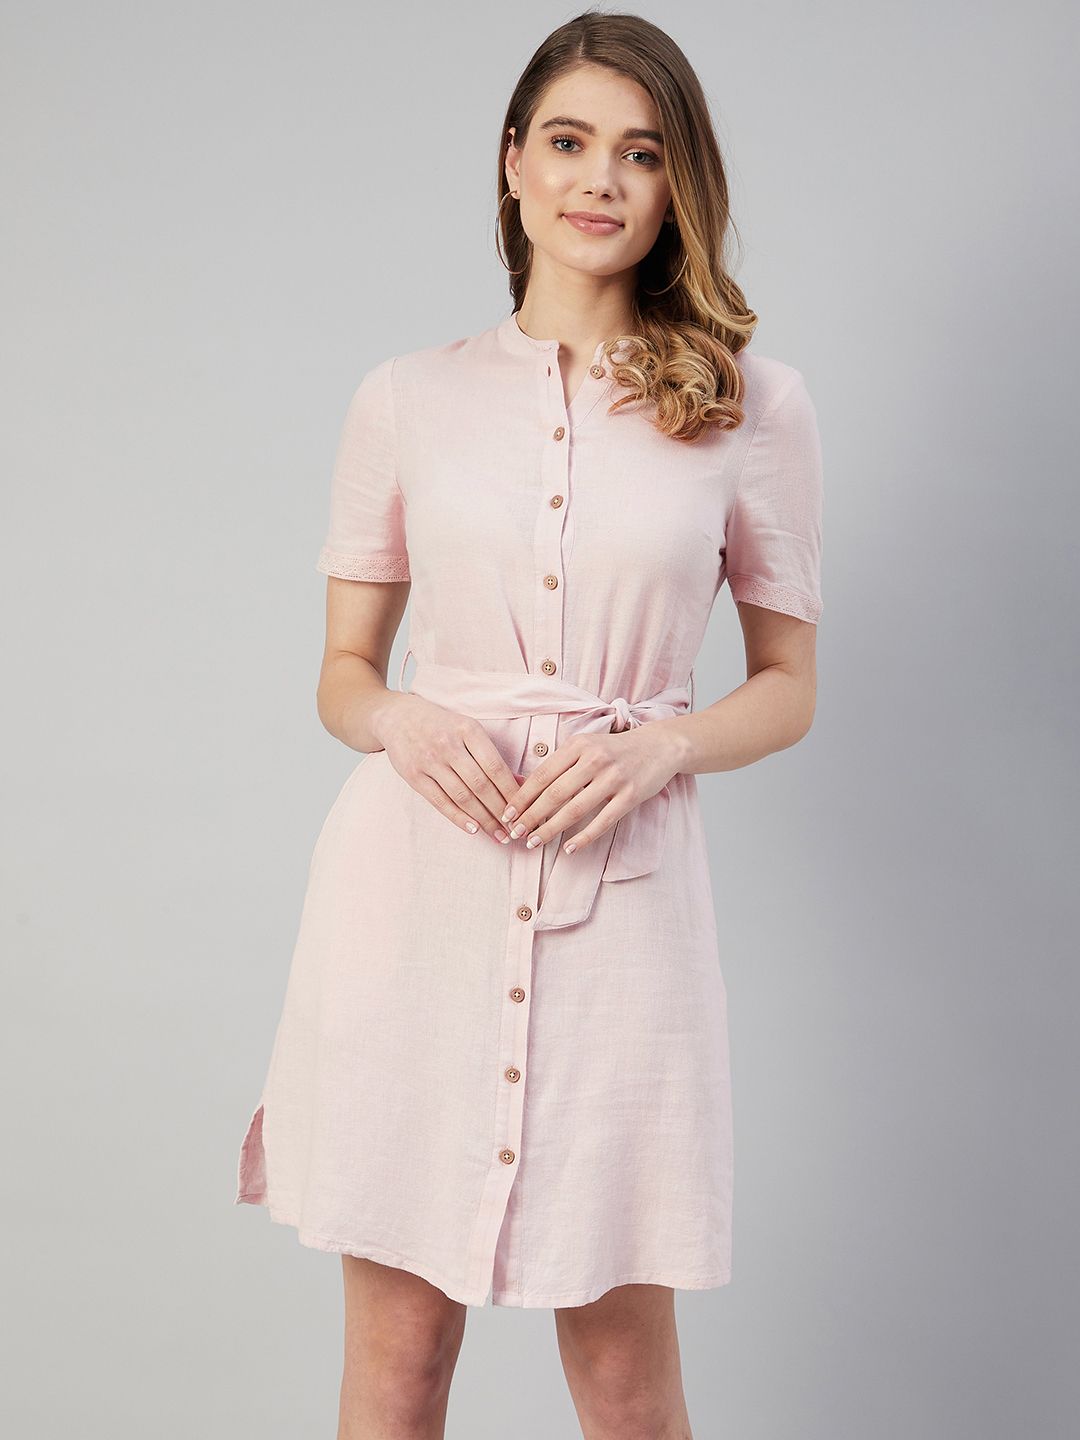 Marks & Spencer Pink Solid Shirt Mini Dress With Tie-Ups Price in India